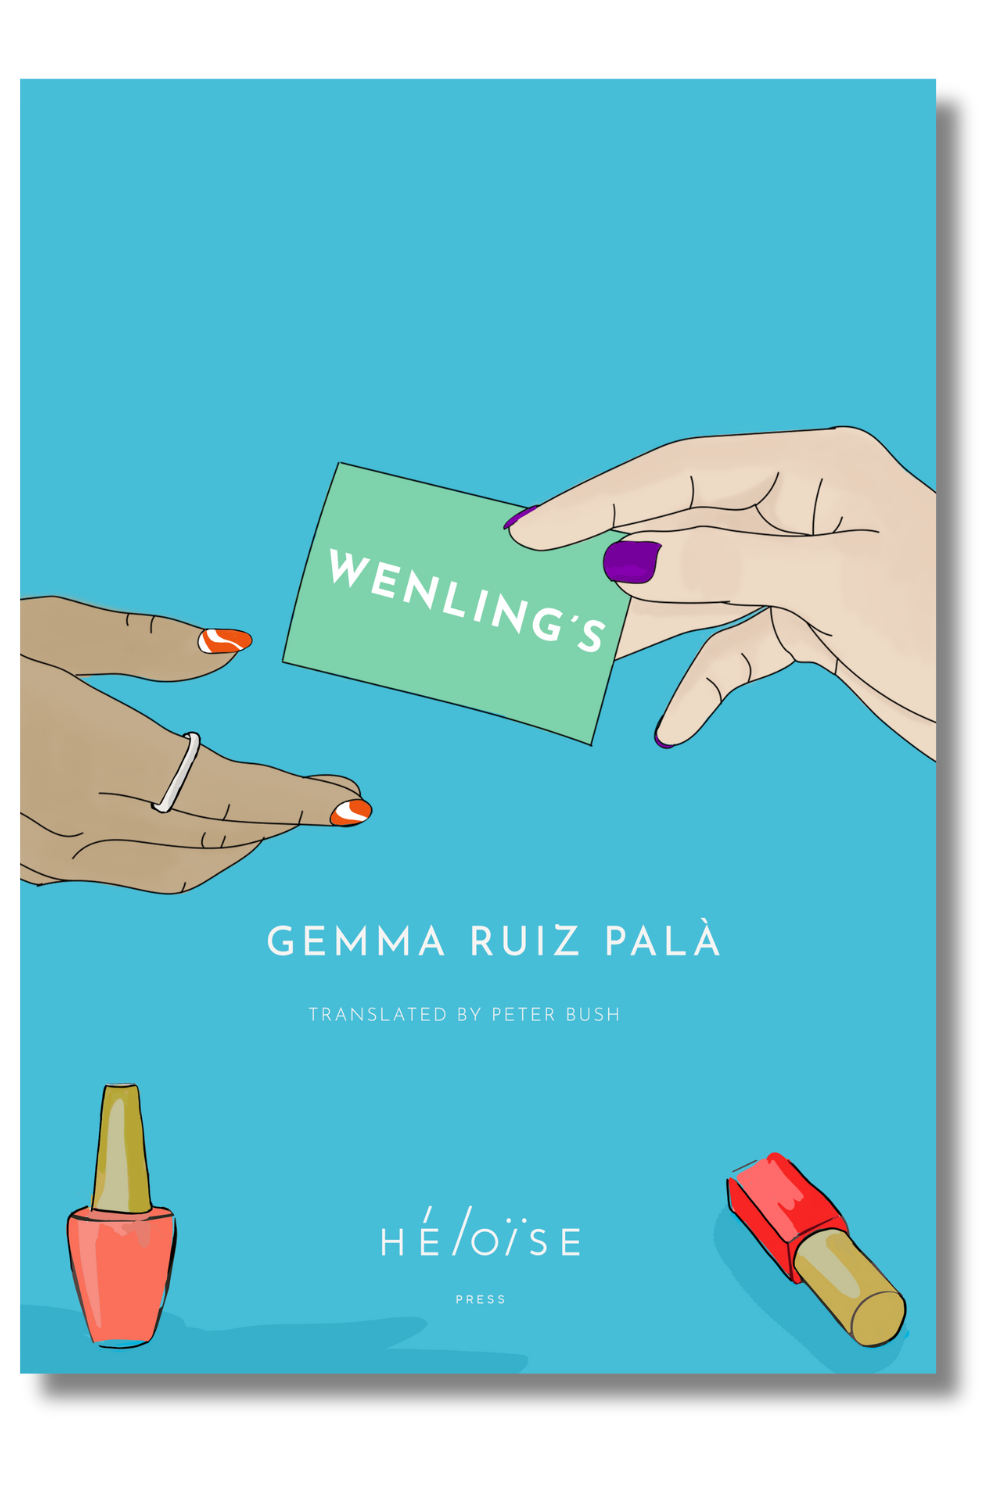 The cover of "Wenling's" by Gemma Ruiz Palà, tr. by Peter Bush